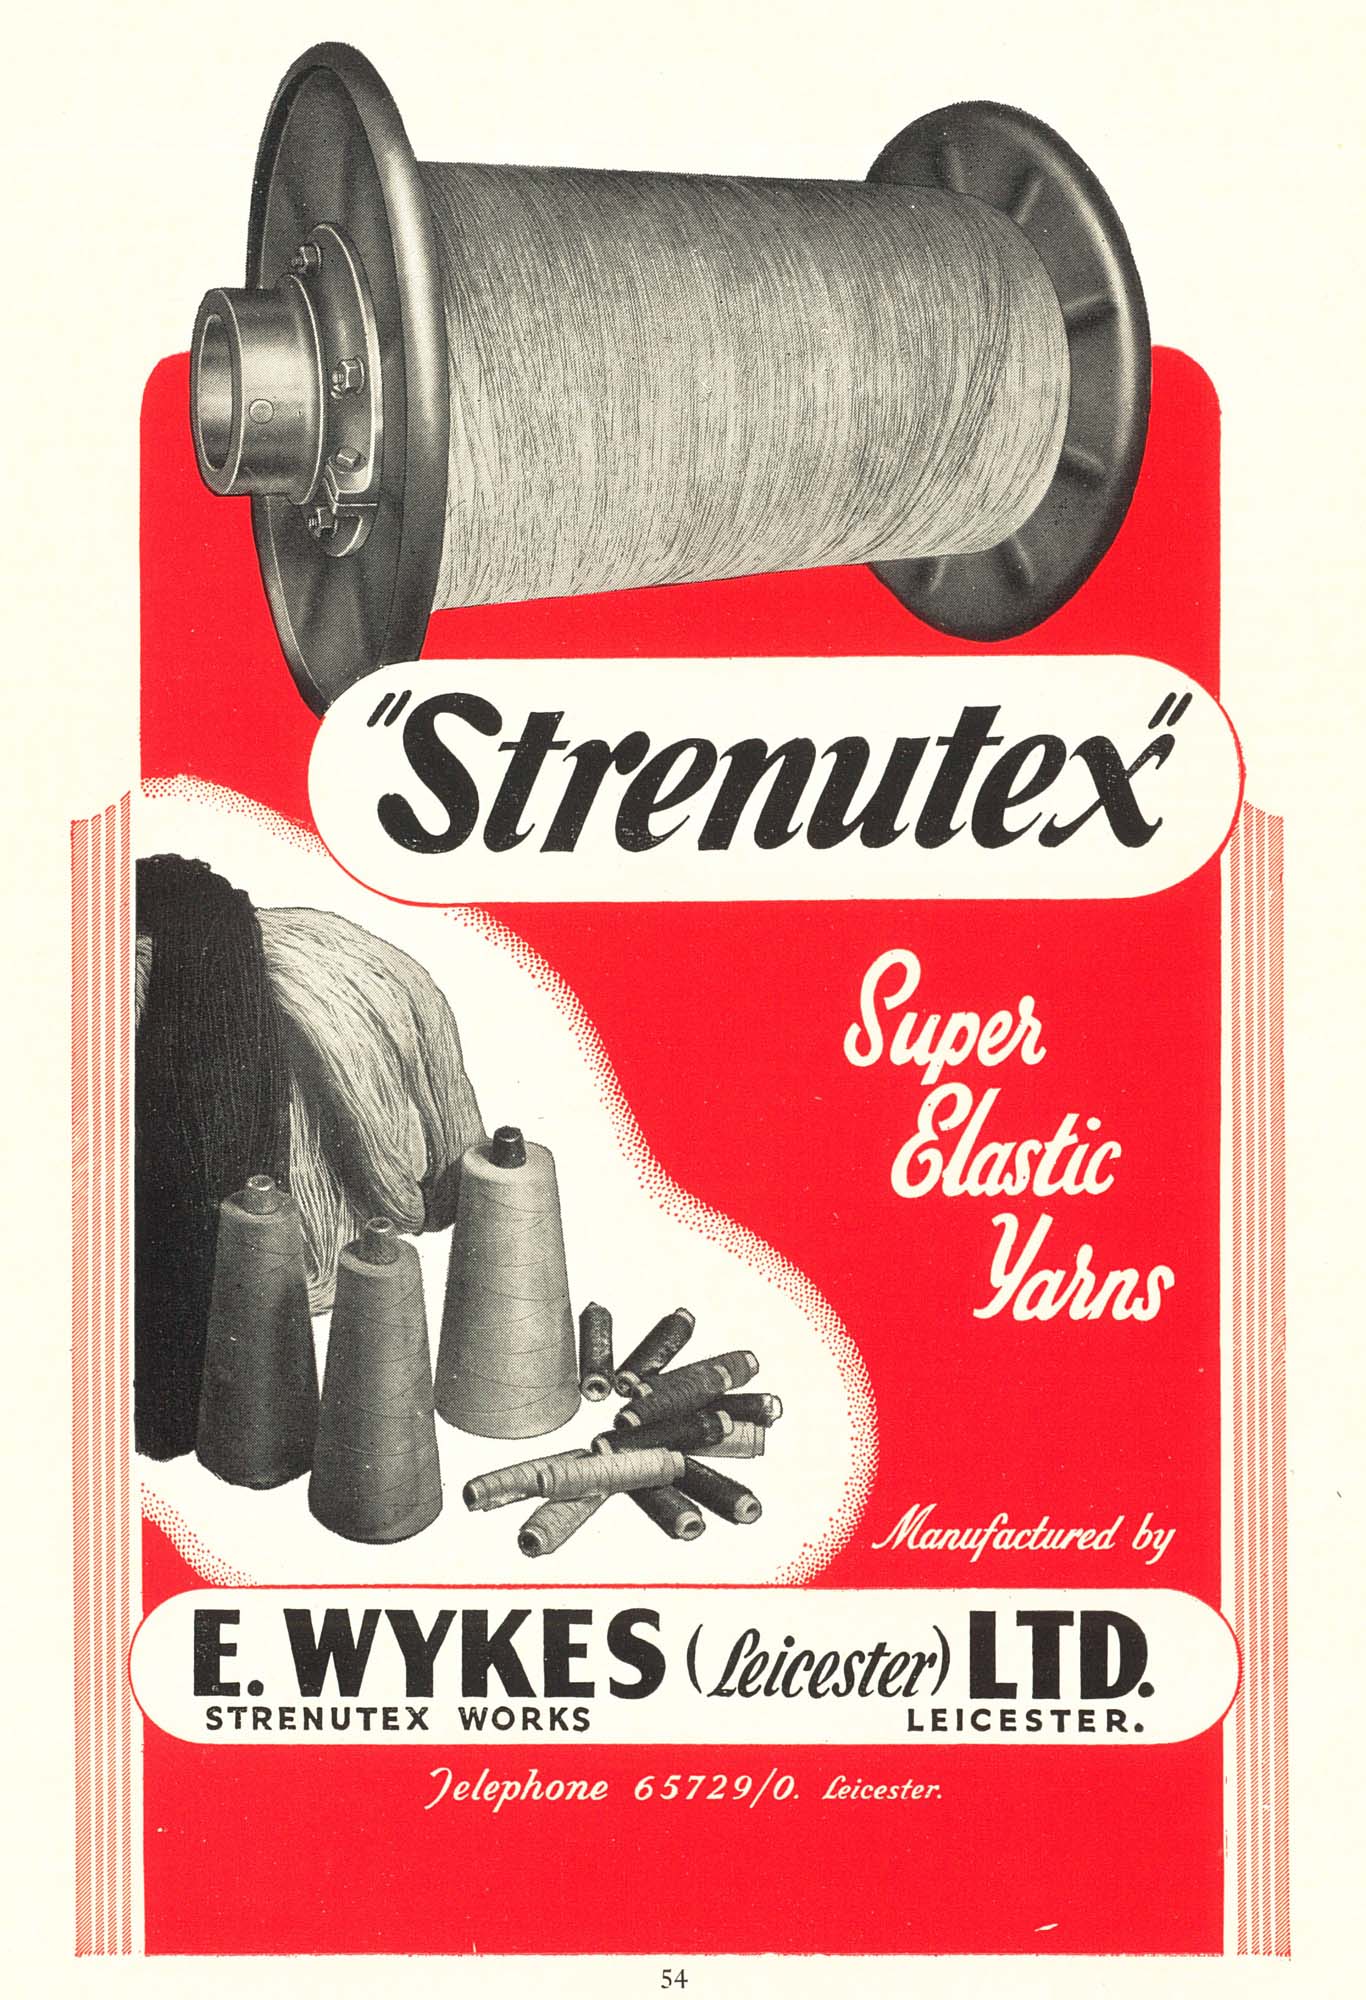 An advert for Strenutex brand elastic yarn, made by E. Wykes Ltd. of Leicester - Leicester Official Handbook 1954